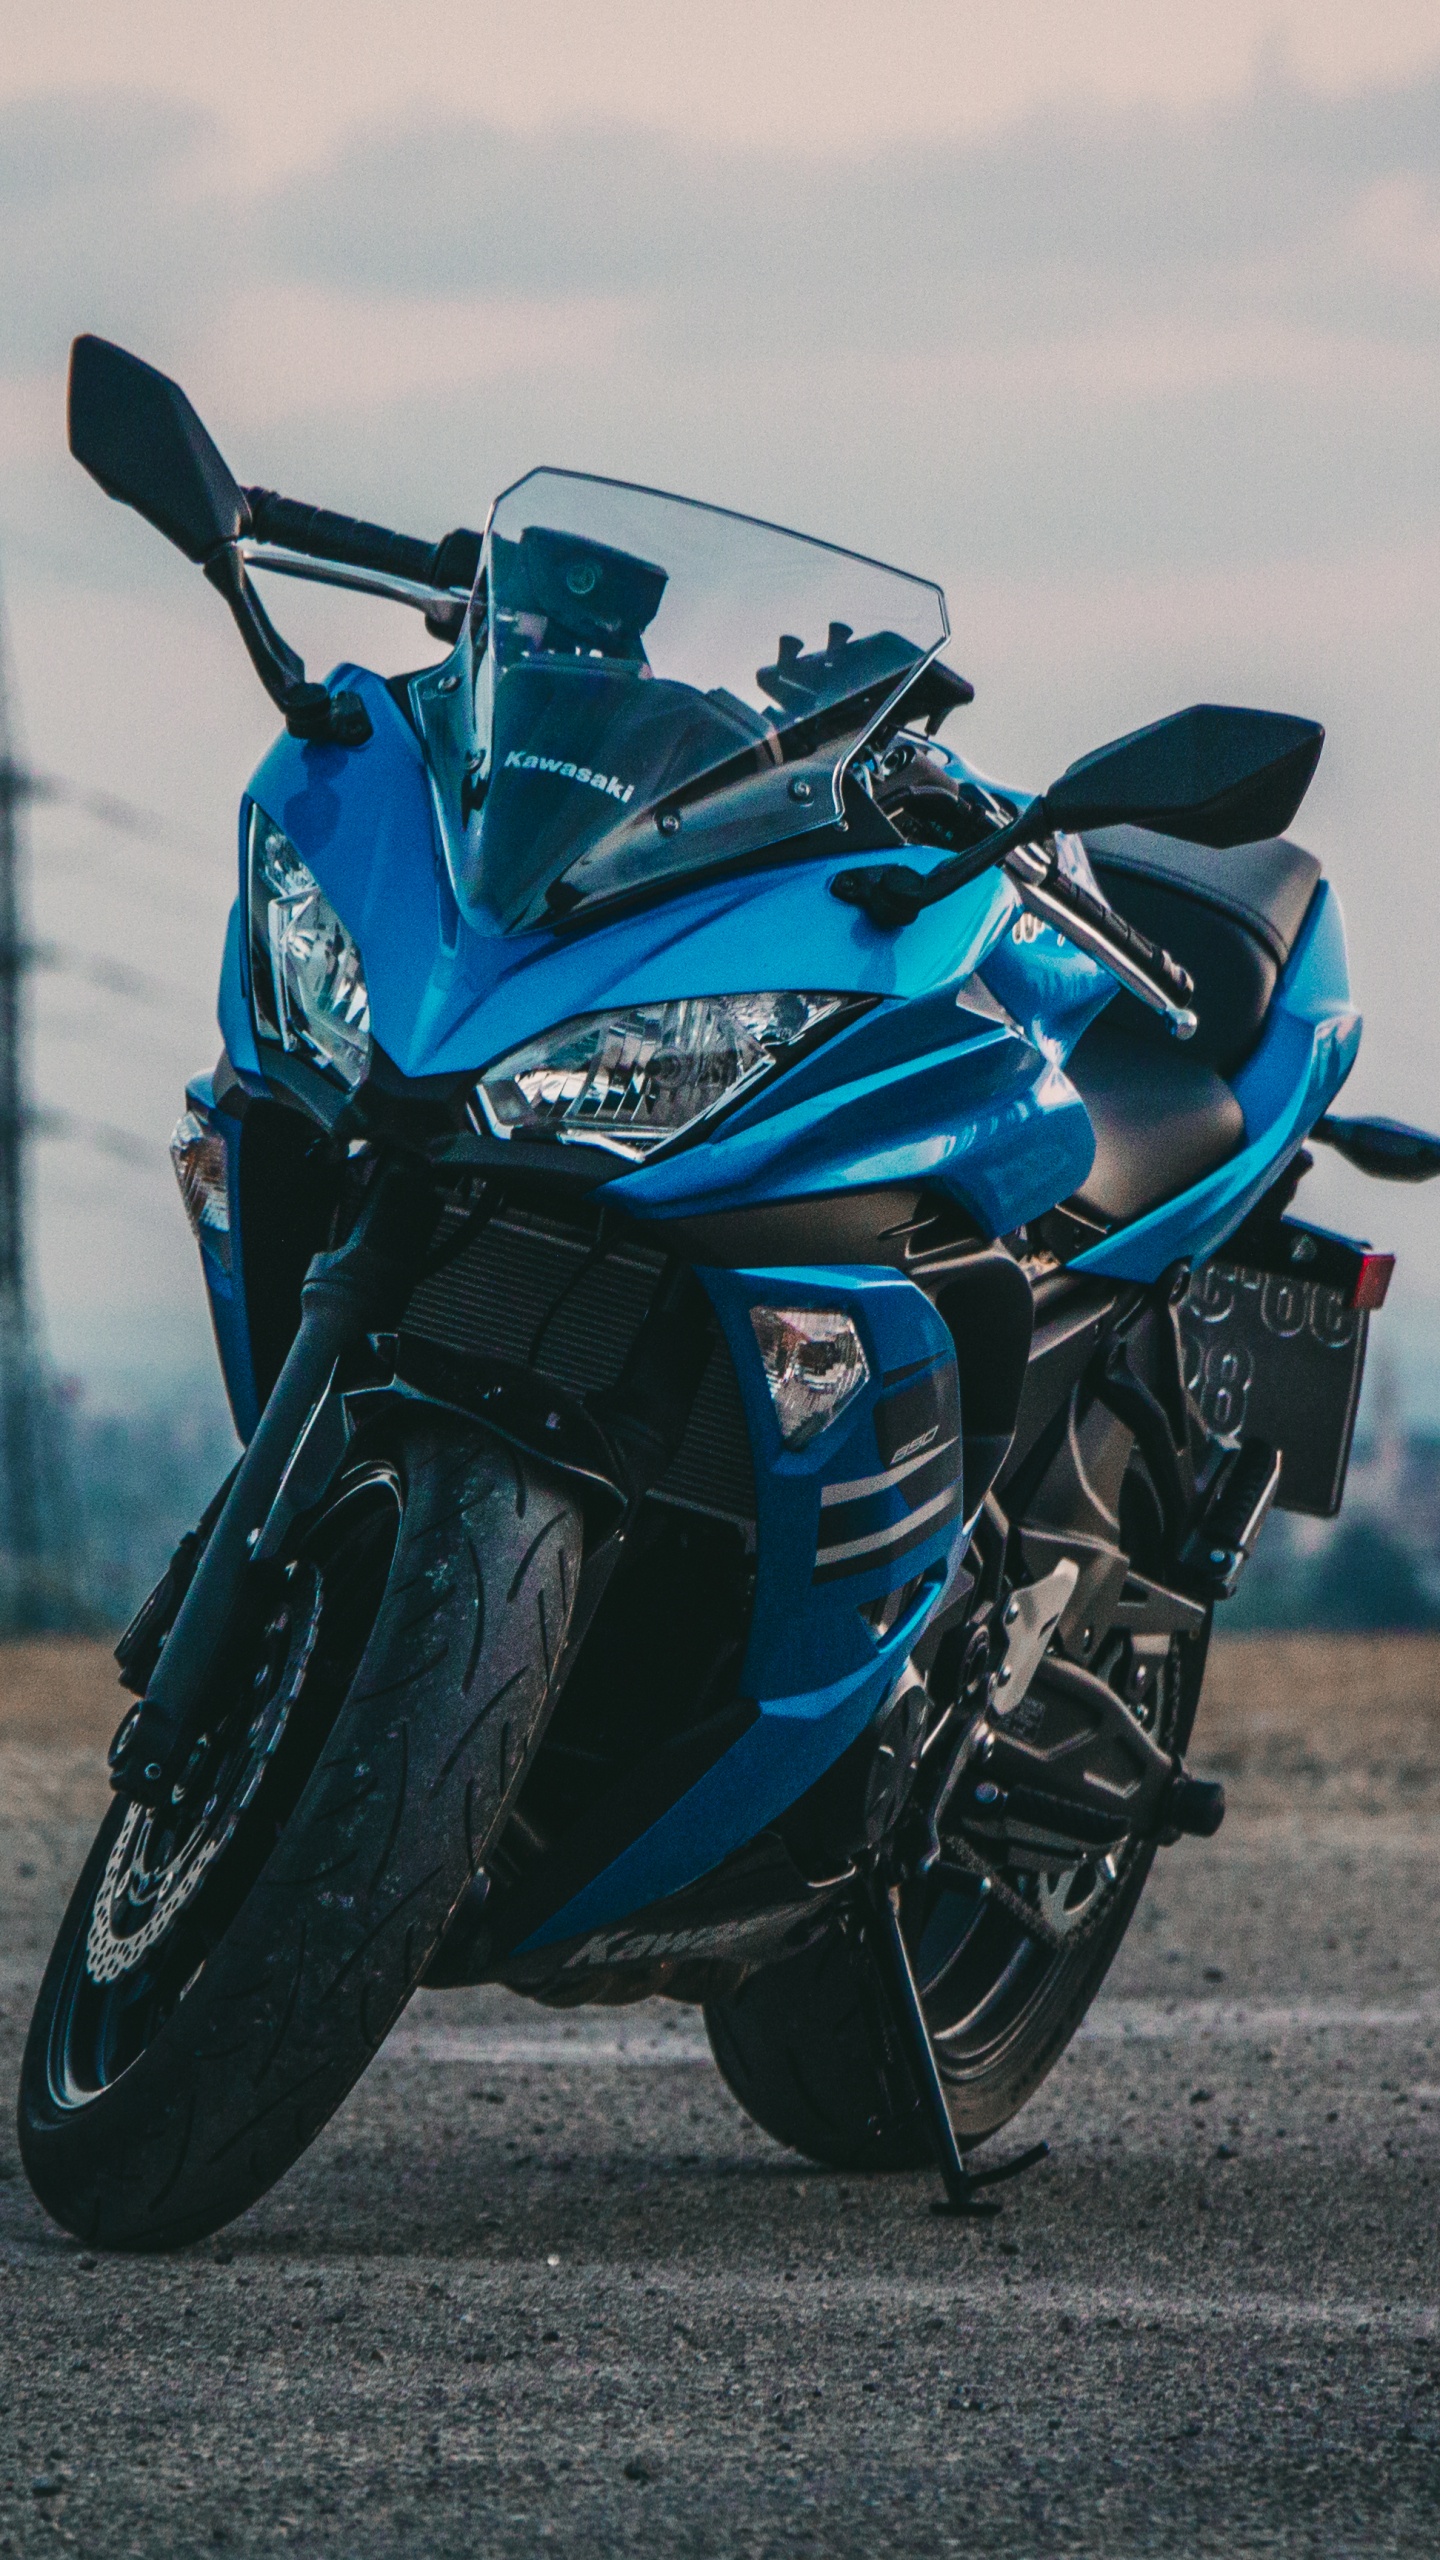 Blue and Black Sports Bike on Gray Asphalt Road During Daytime. Wallpaper in 1440x2560 Resolution